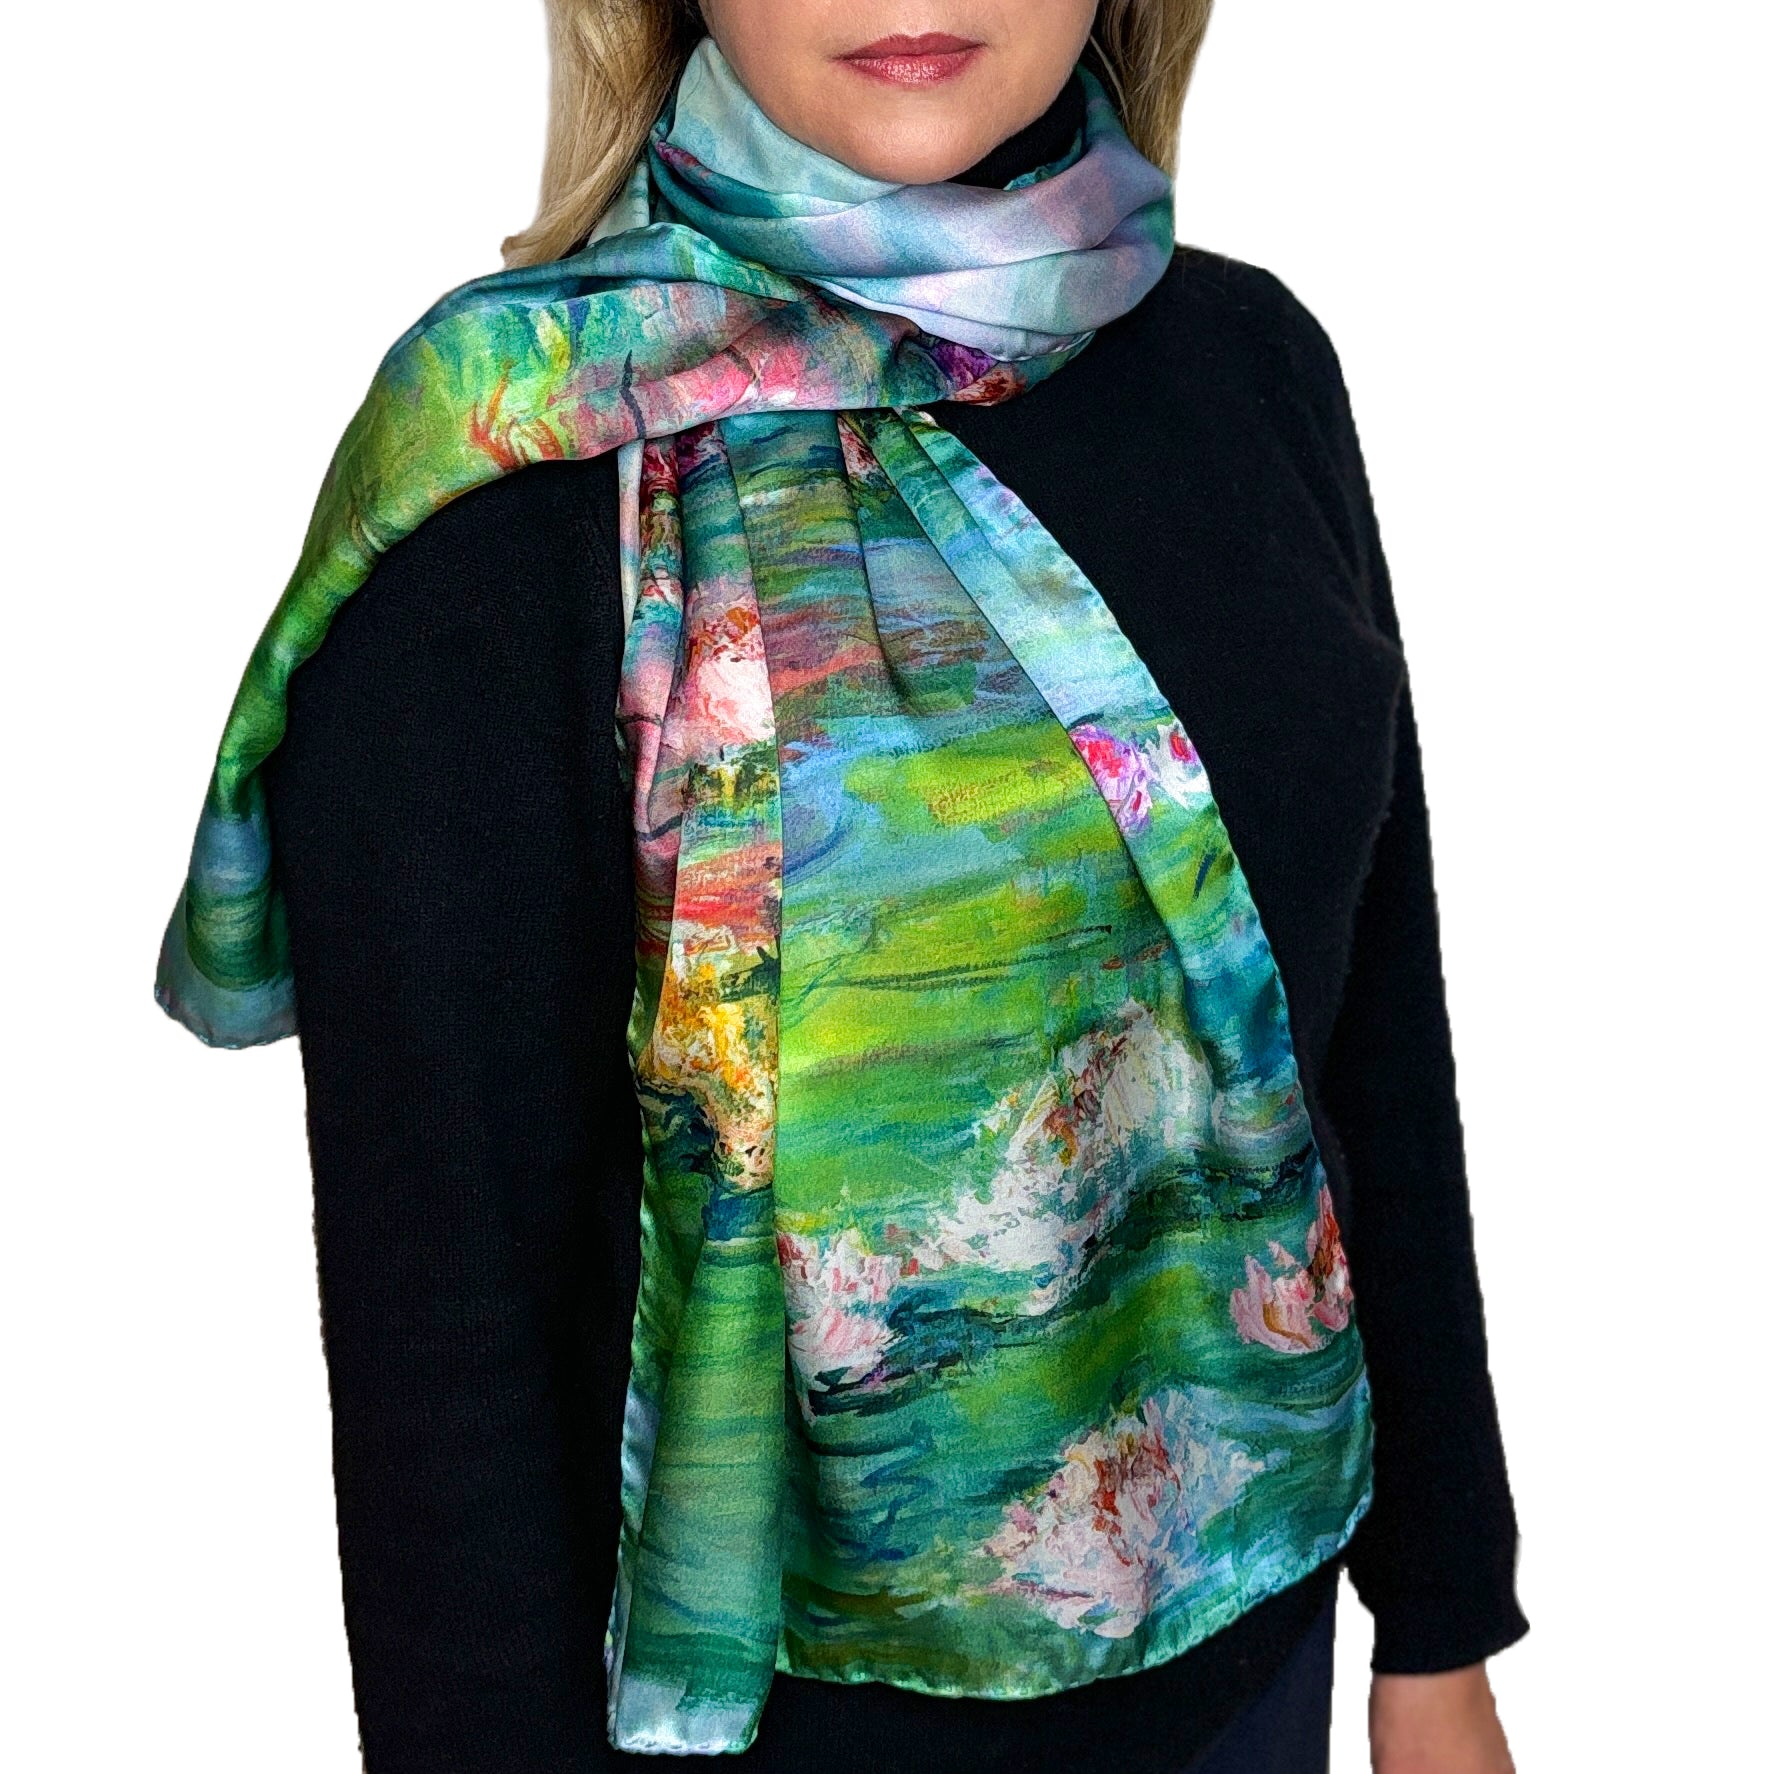 Woman in black wearing a long silk scarf with pink and white water lilies on a green and blue background, Waterlily Radiance, from Oksana Fine Art and Design